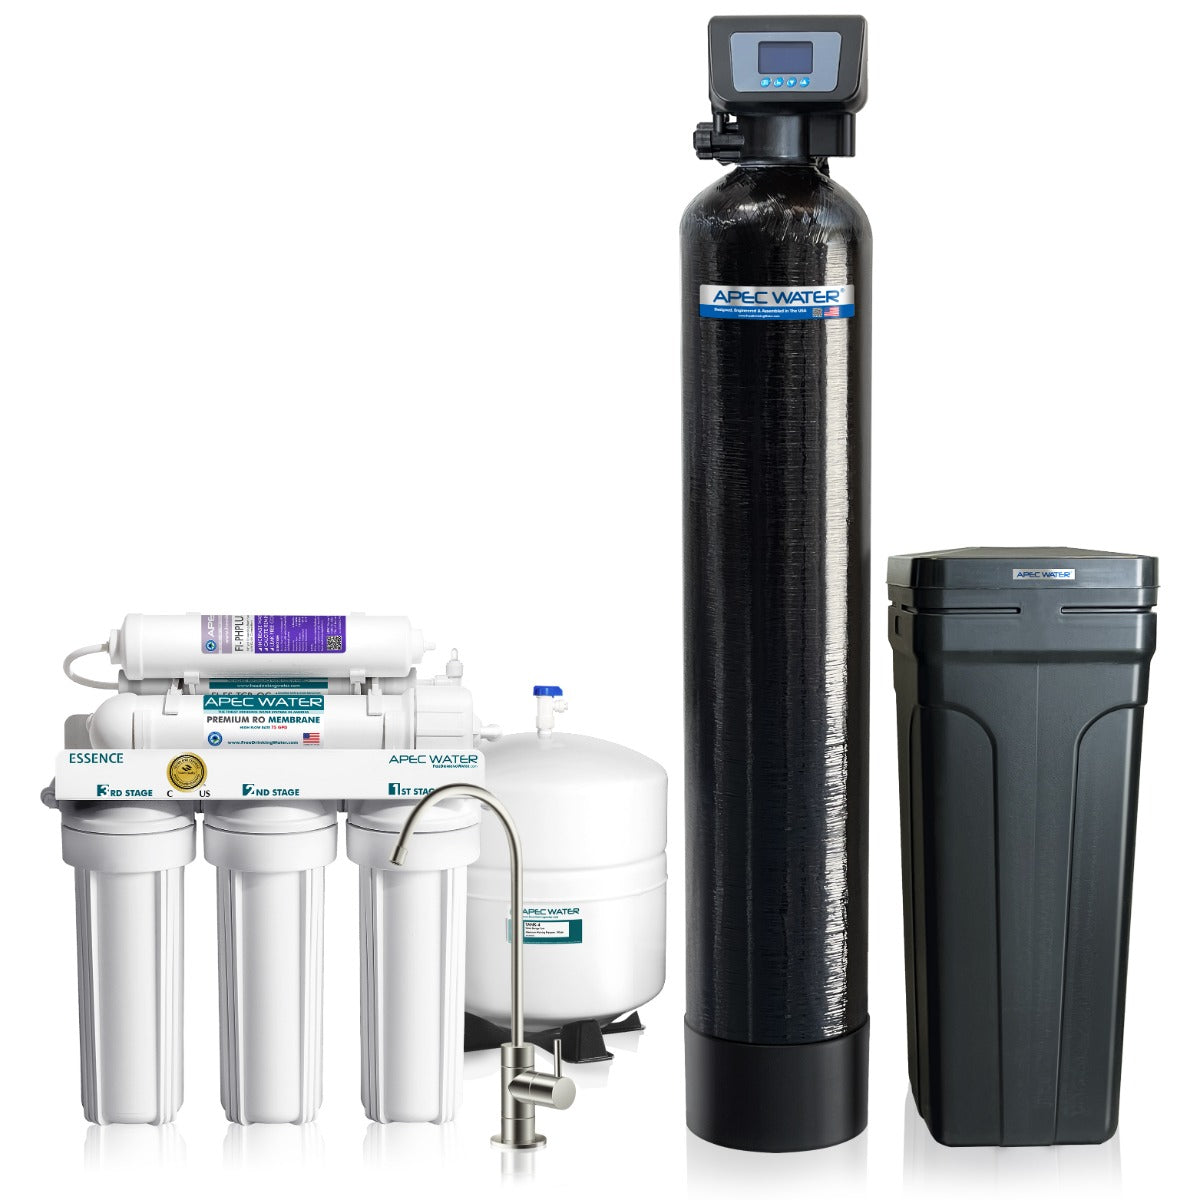 Hydro Express Water Softener 45 Plus Alkaline Mineral 6-Stage RO System Value Bundle